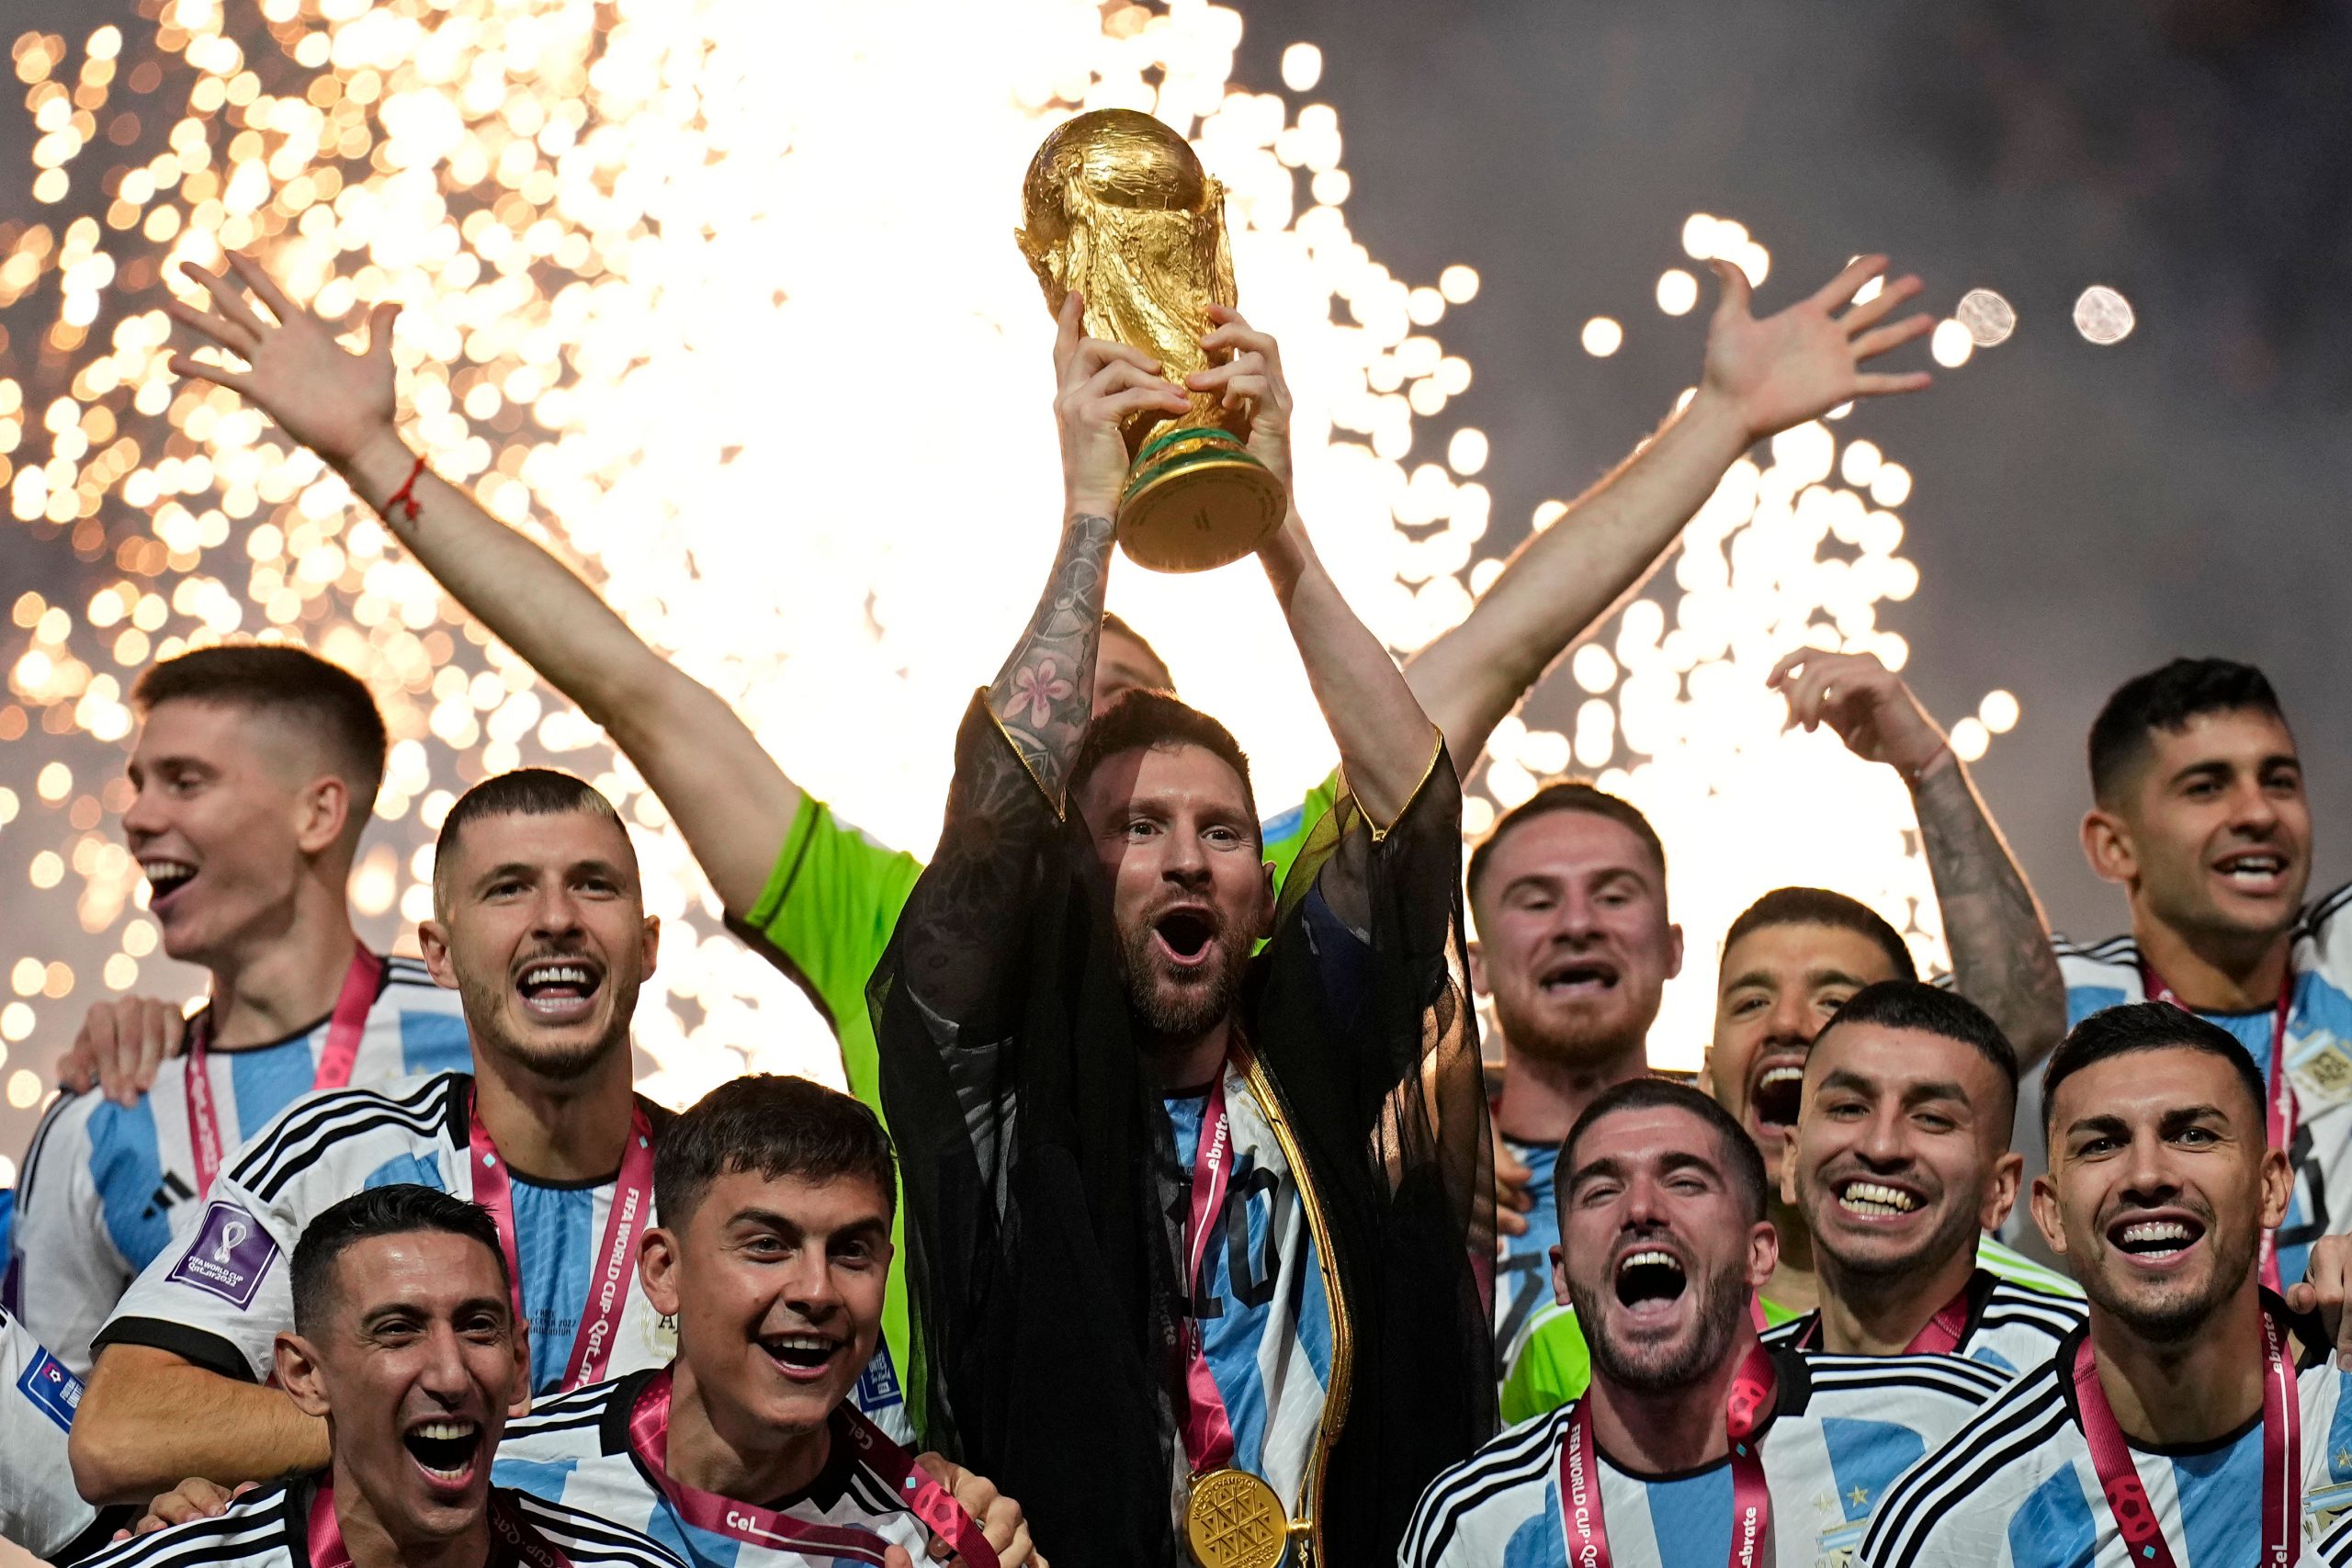 FIFA World Cup final vs NFL Superbowl: Who wins the viewership battle?